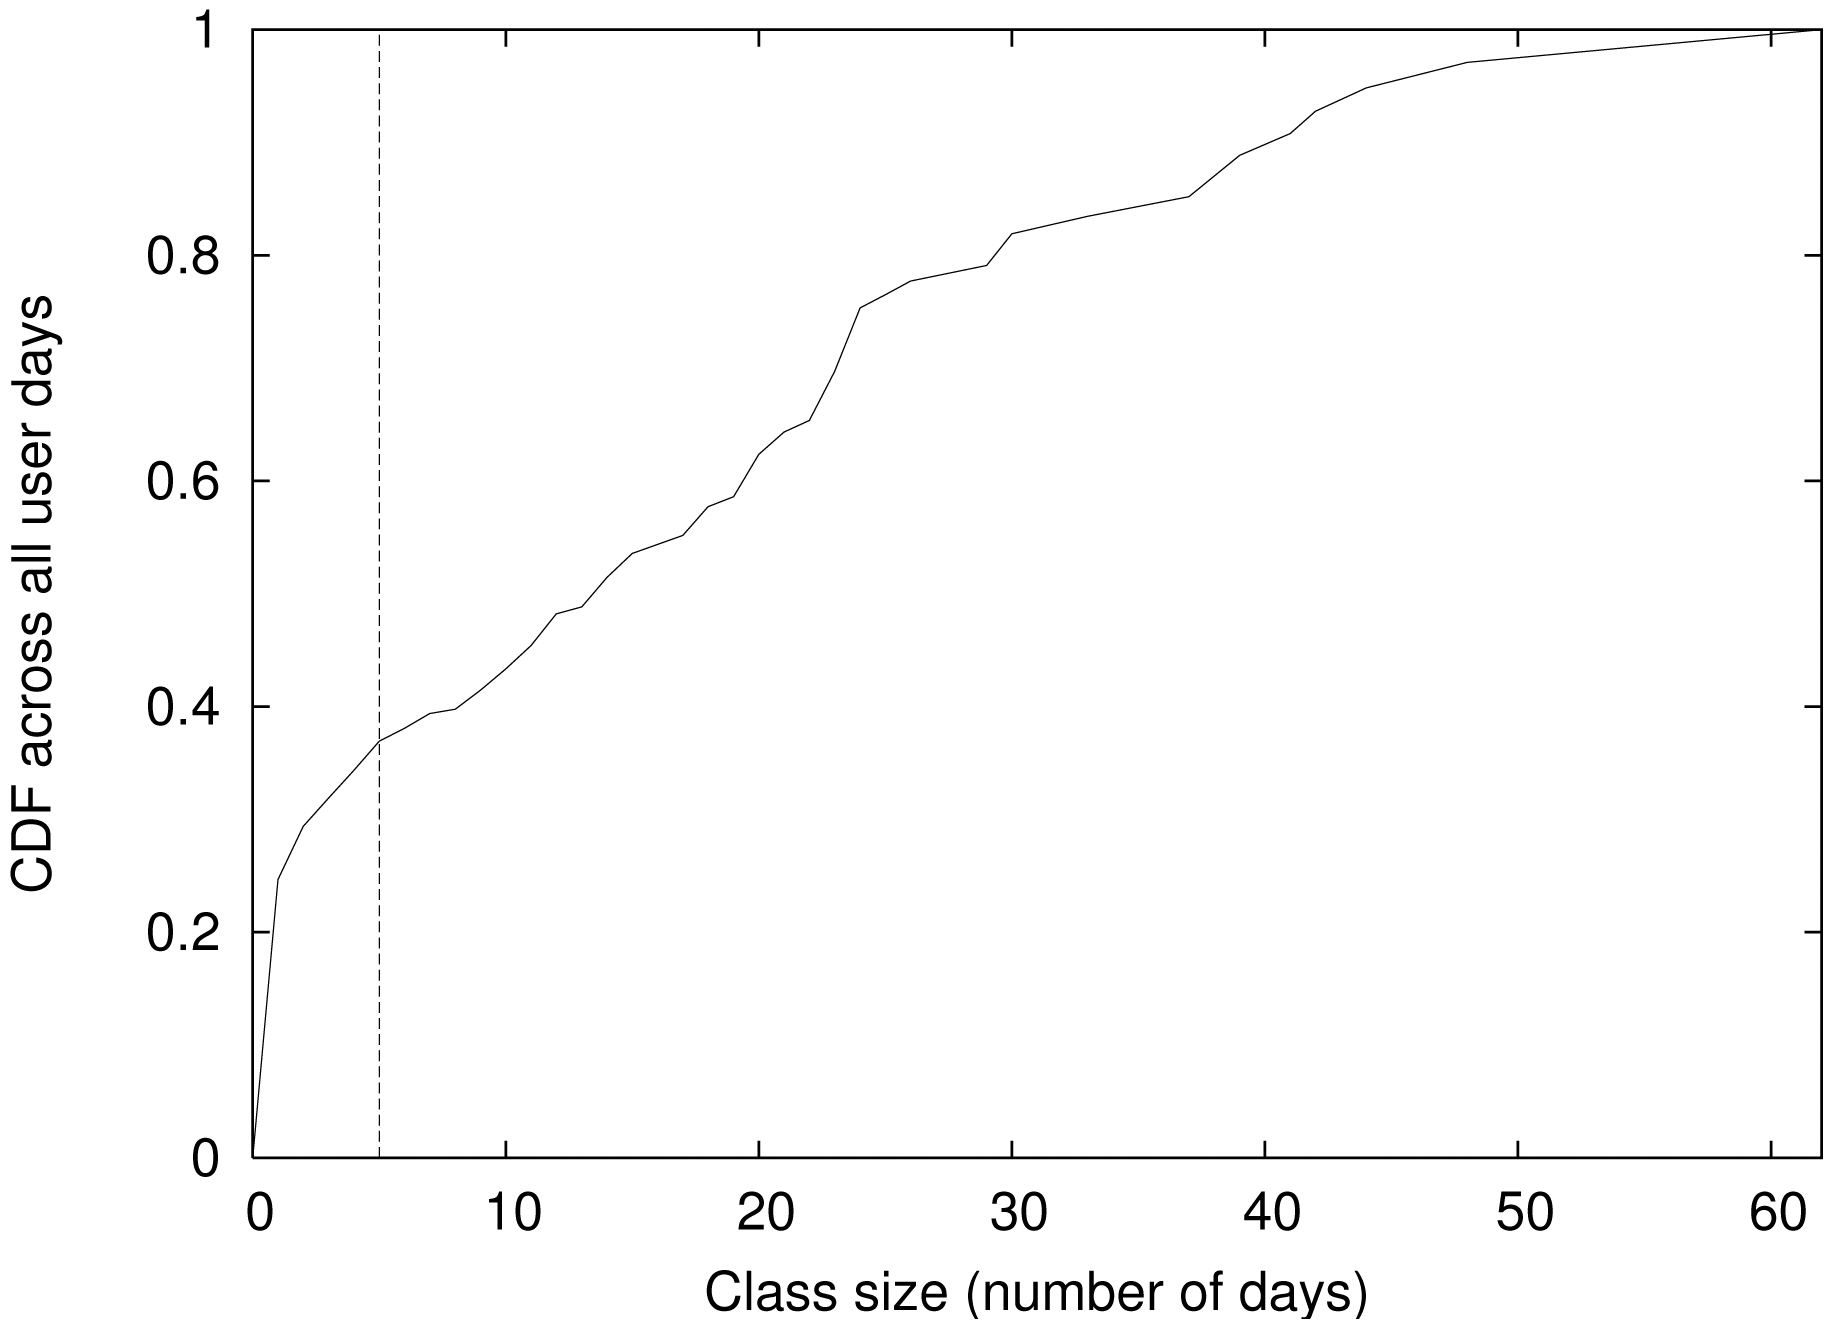 Cumulative distribution function (CDF) of classes with specific size (in terms of days) across 2128 user days. The default threshold to be considered as a base class is 5 days.